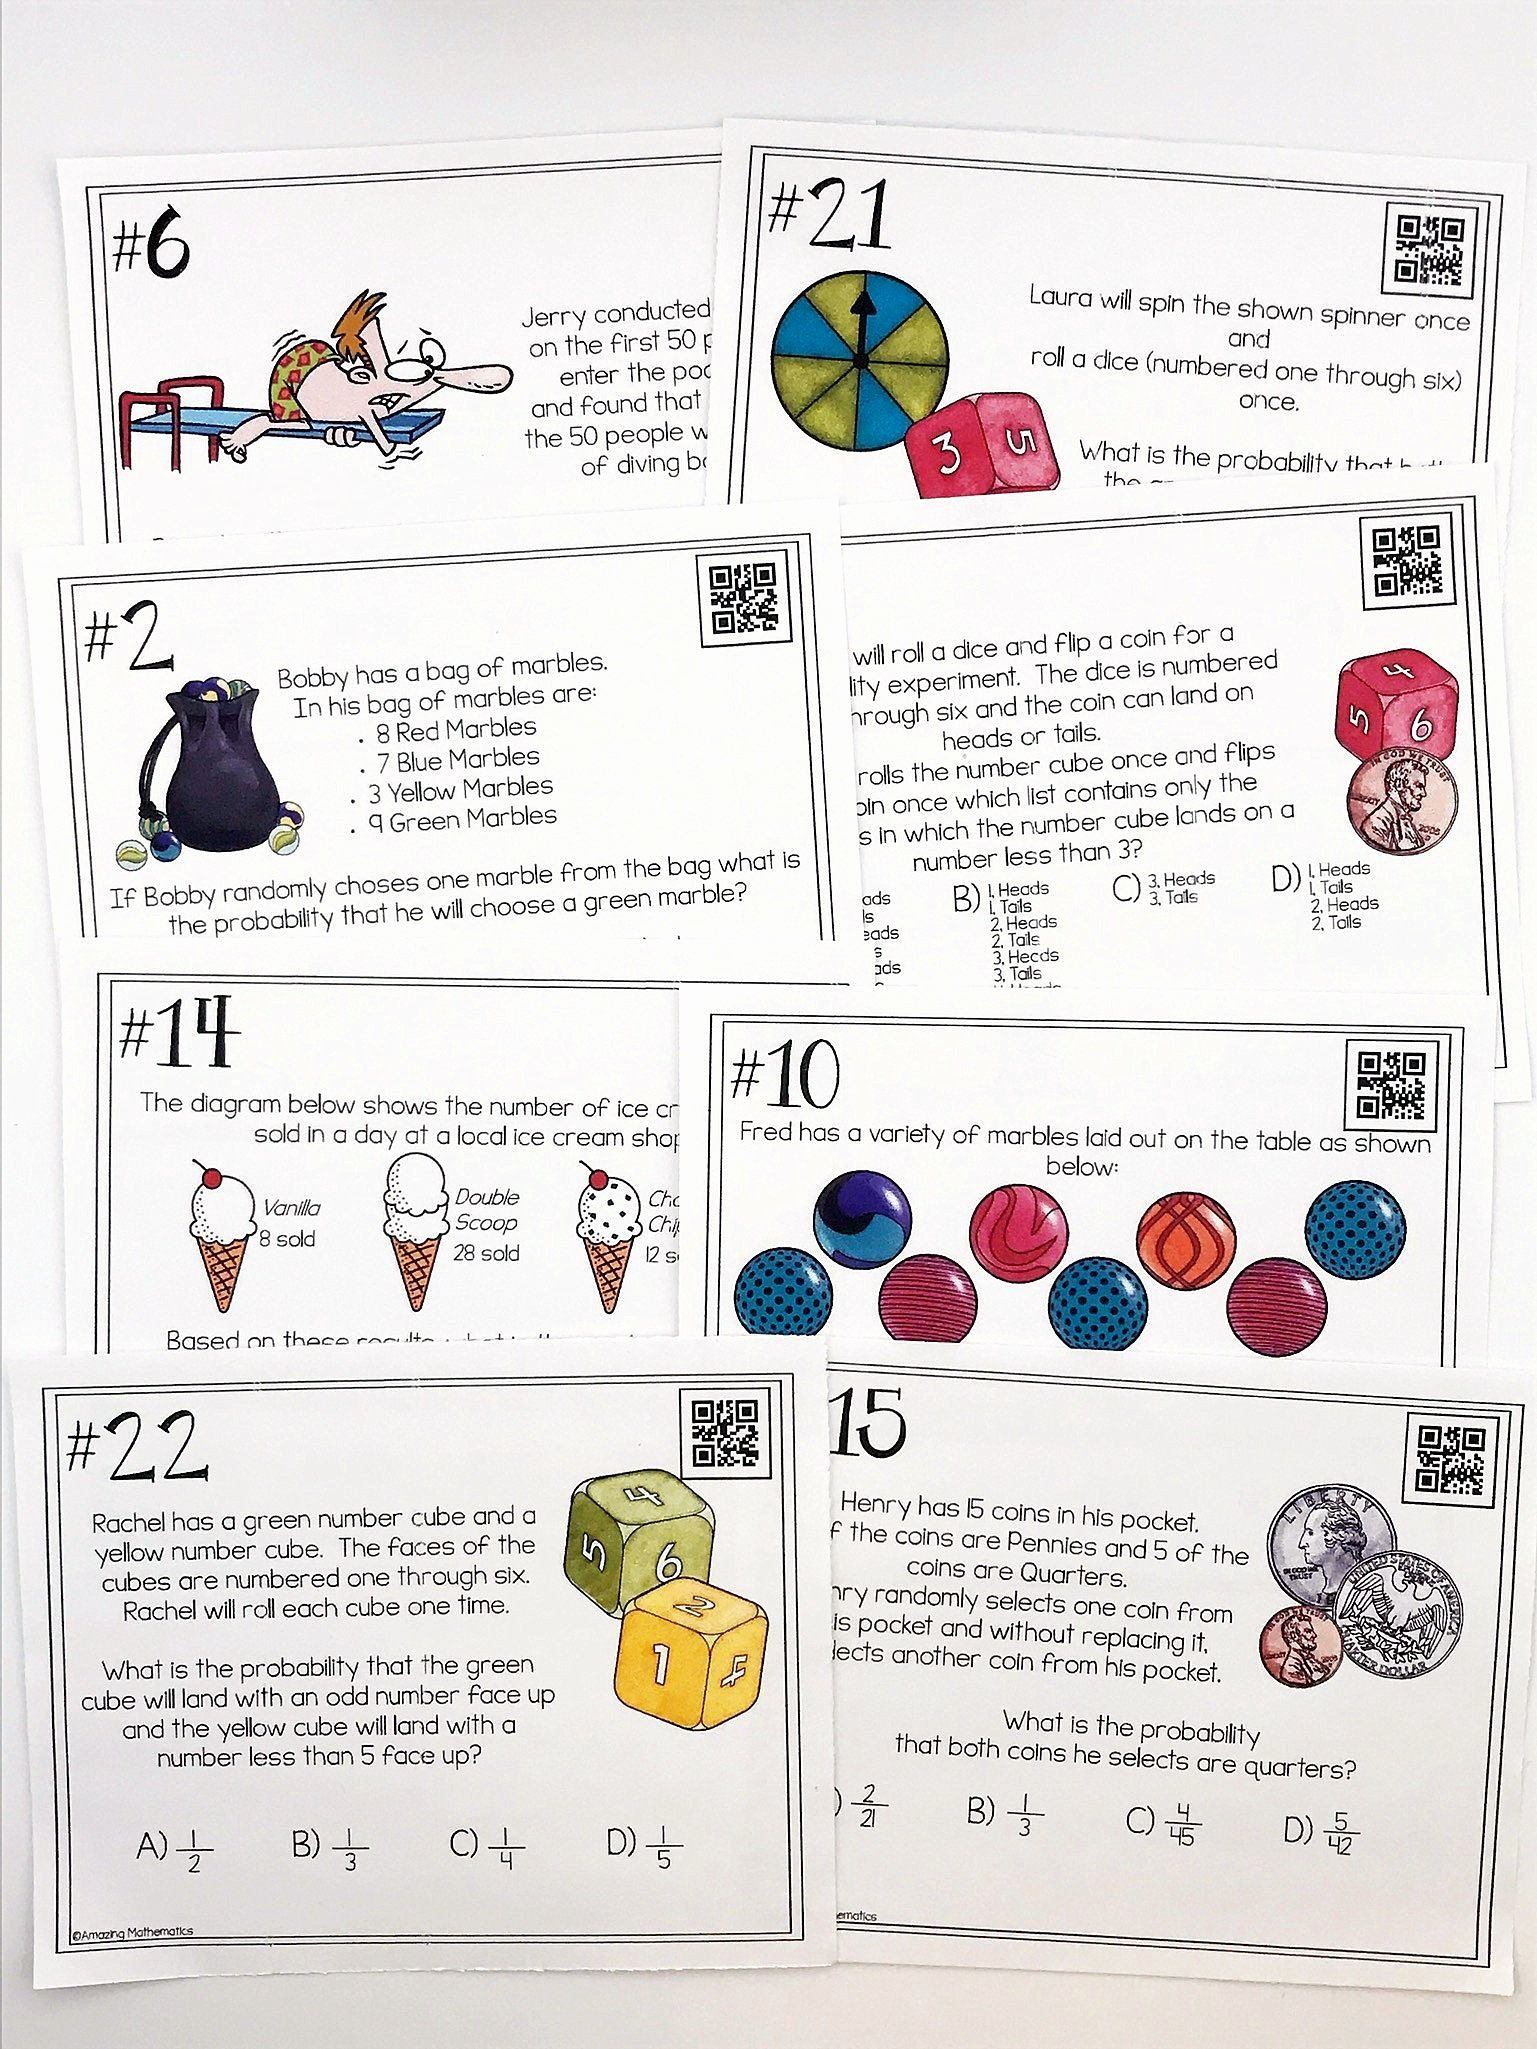 Compound events Worksheets Beautiful Probability Pound events Worksheet Pdf Worksheet